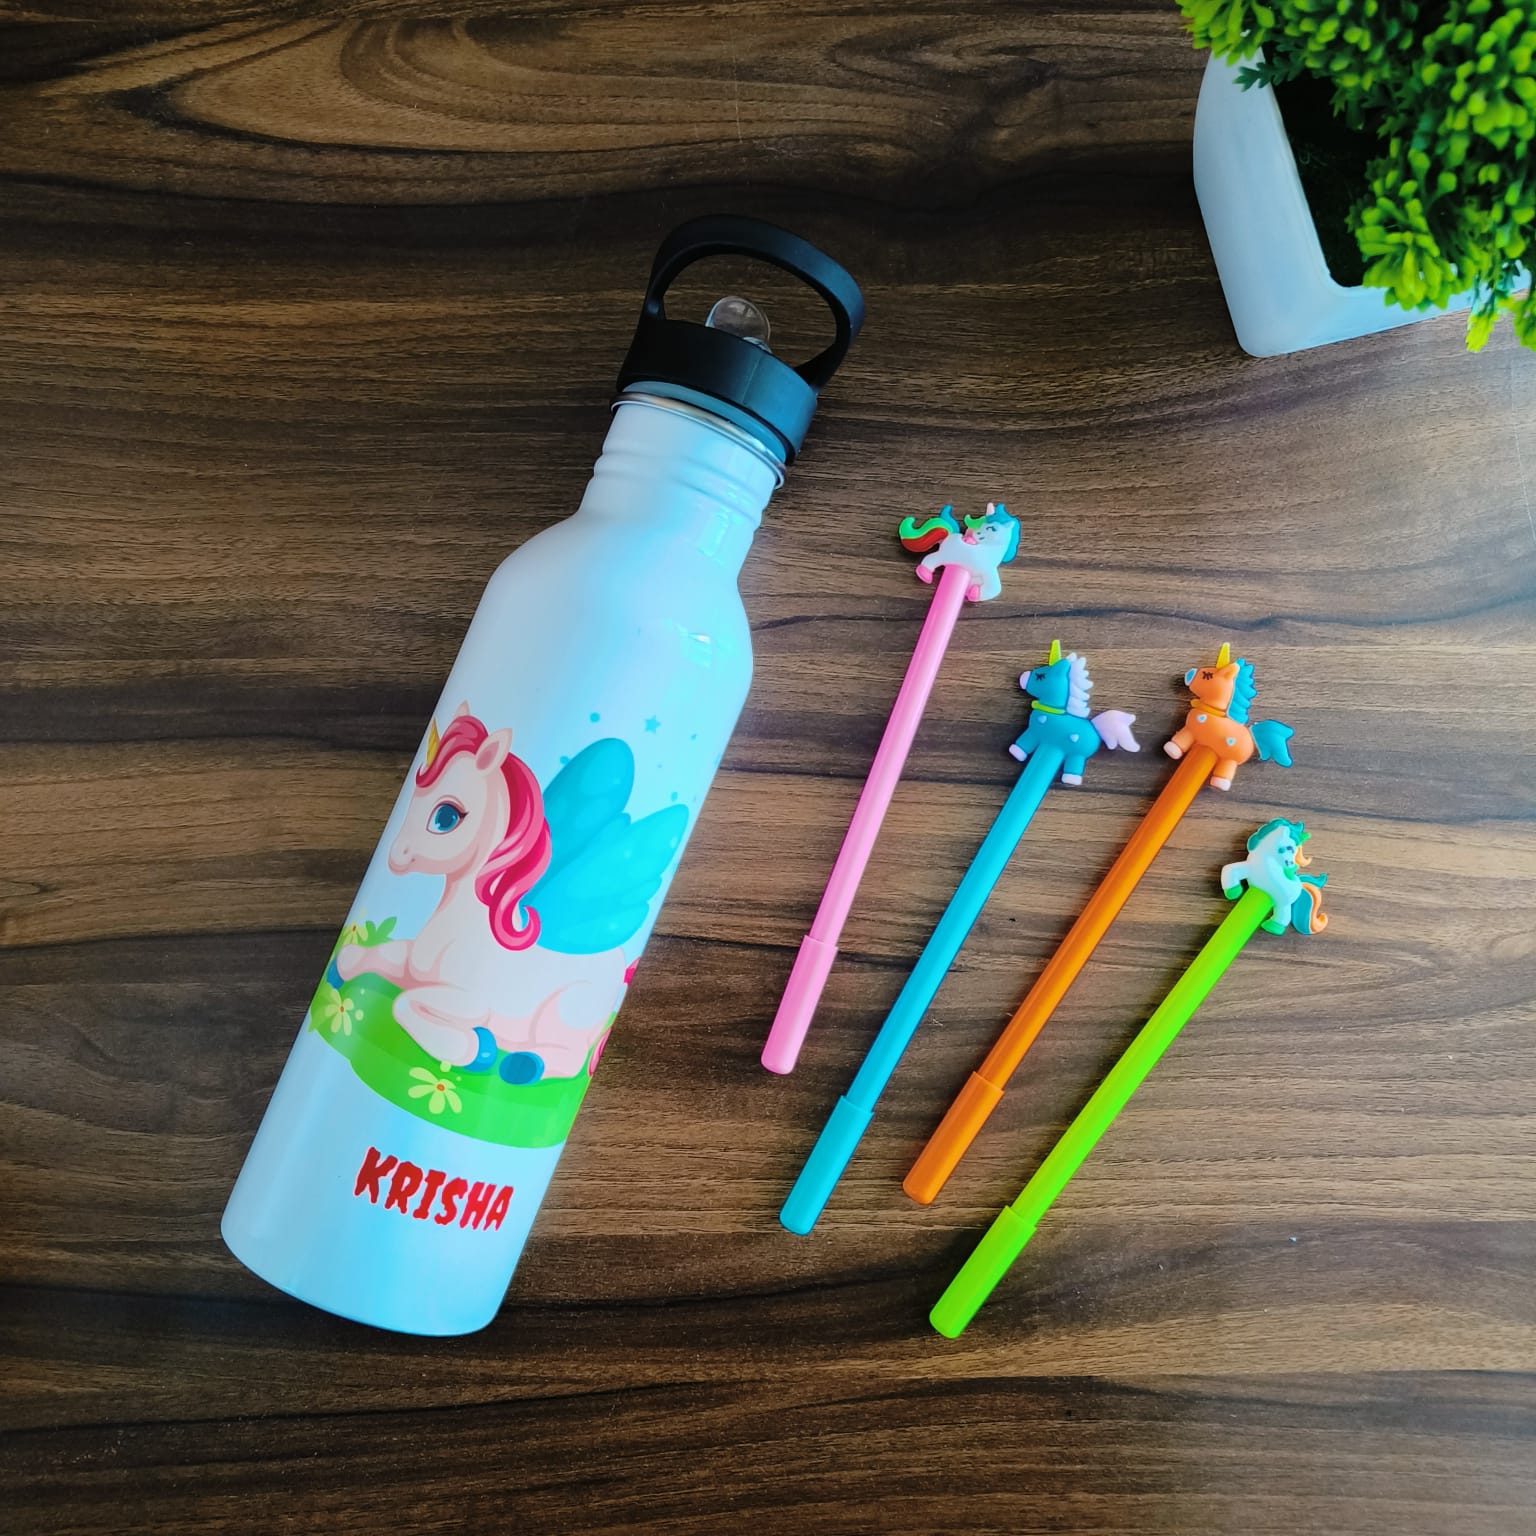 Personalized Sipper Straw Bottle - Customized Bottle - Name Bottle - Sipper  Straw Flask With Name - VivaGifts